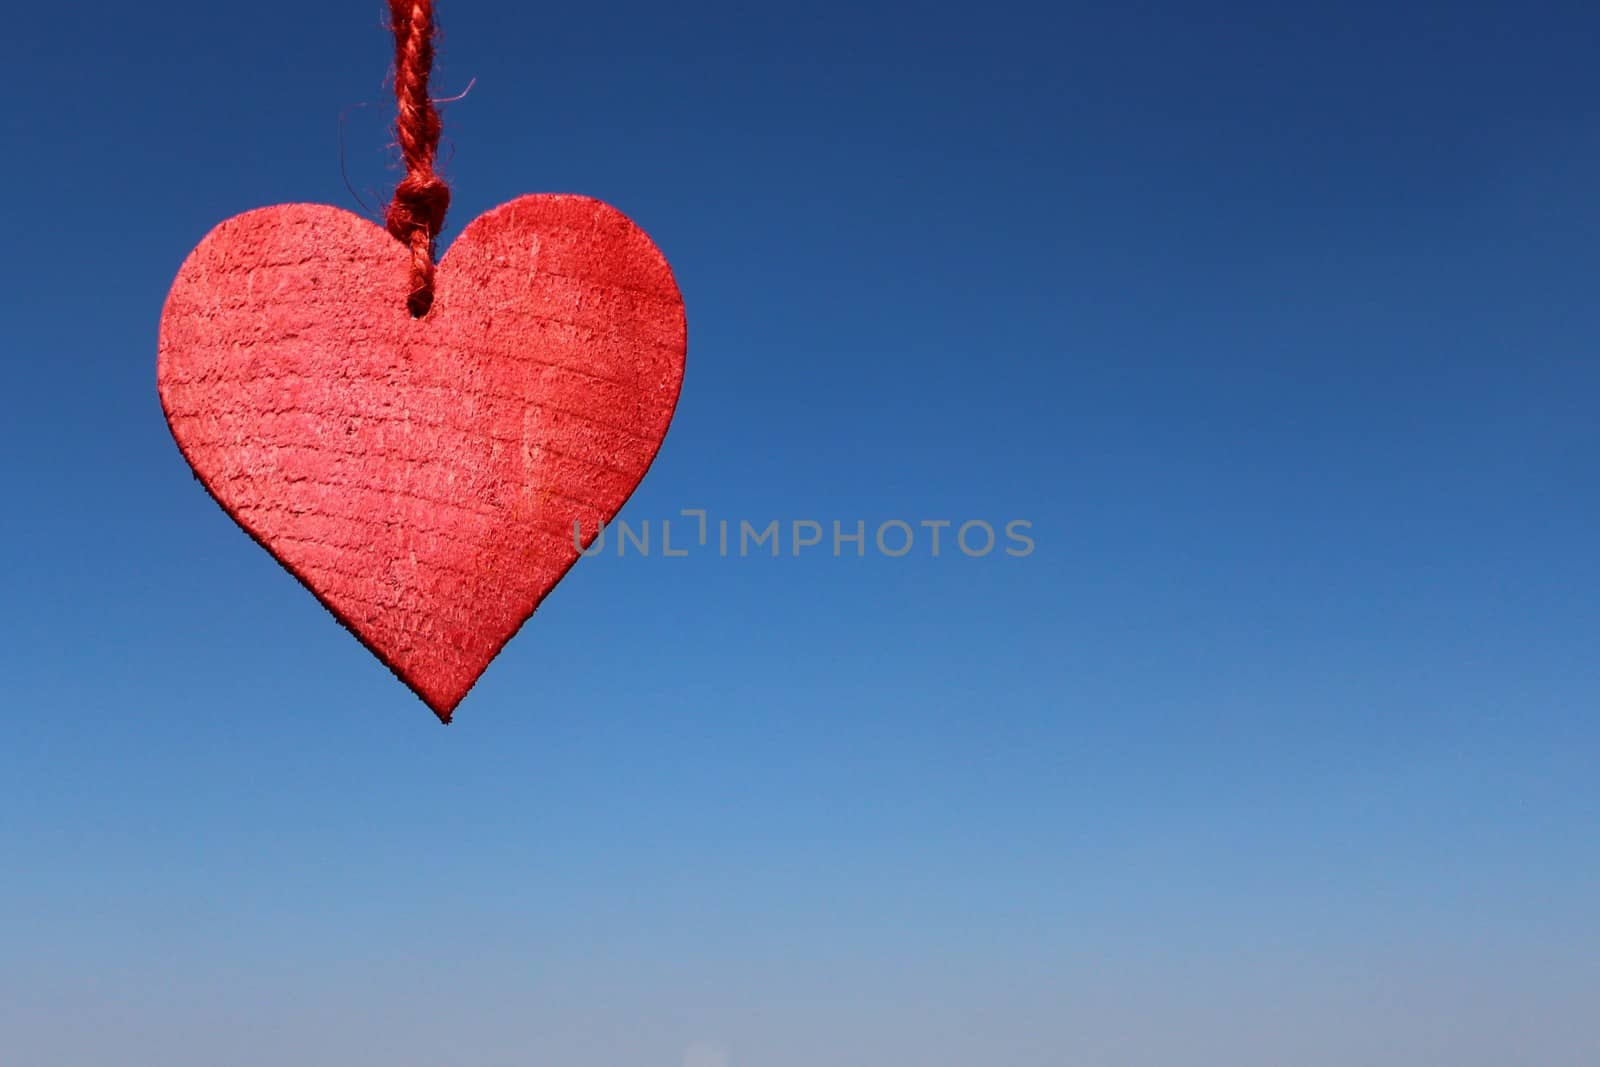 The picture shows a red heart on the blue sky.